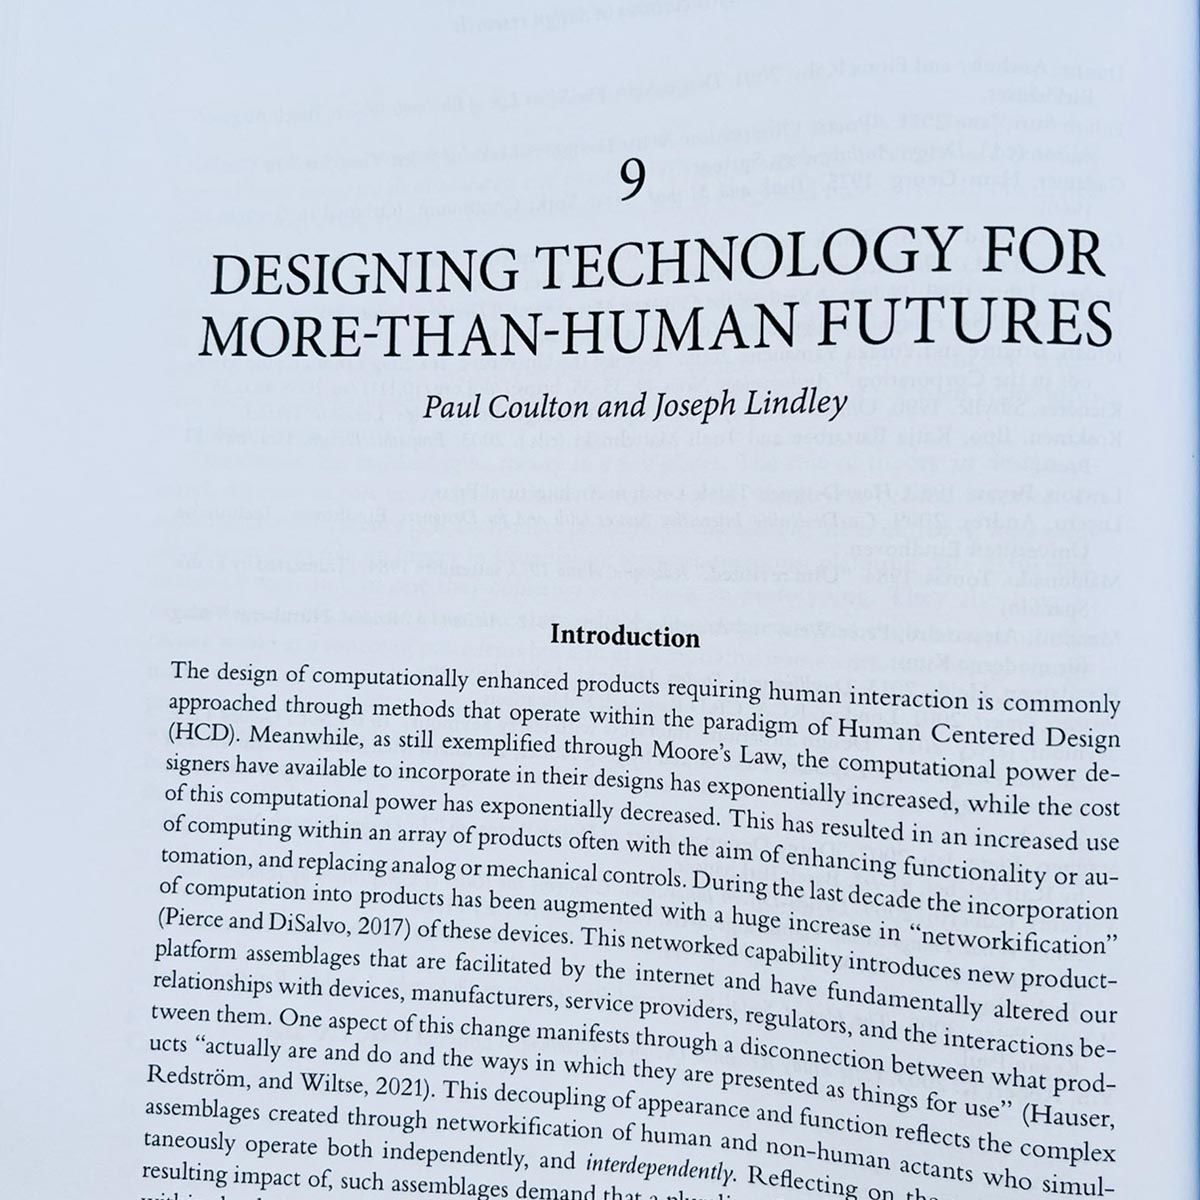 Intro to chapter on Designing Technology for More-Than-Human Futures